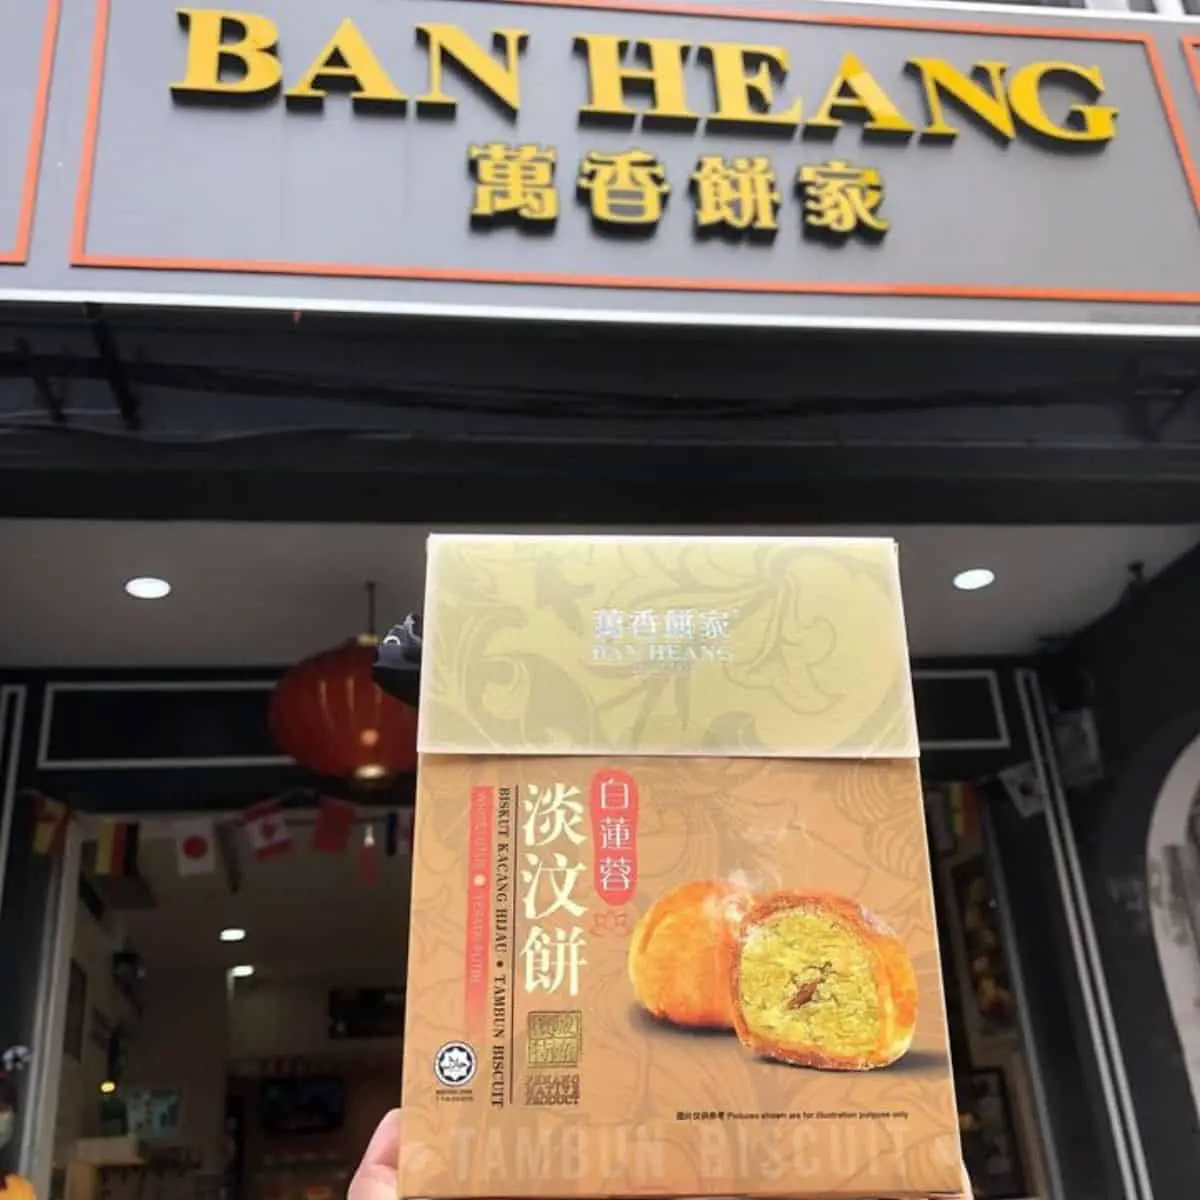 A person holding a box of tambun biscuits in front of Ban Heang building